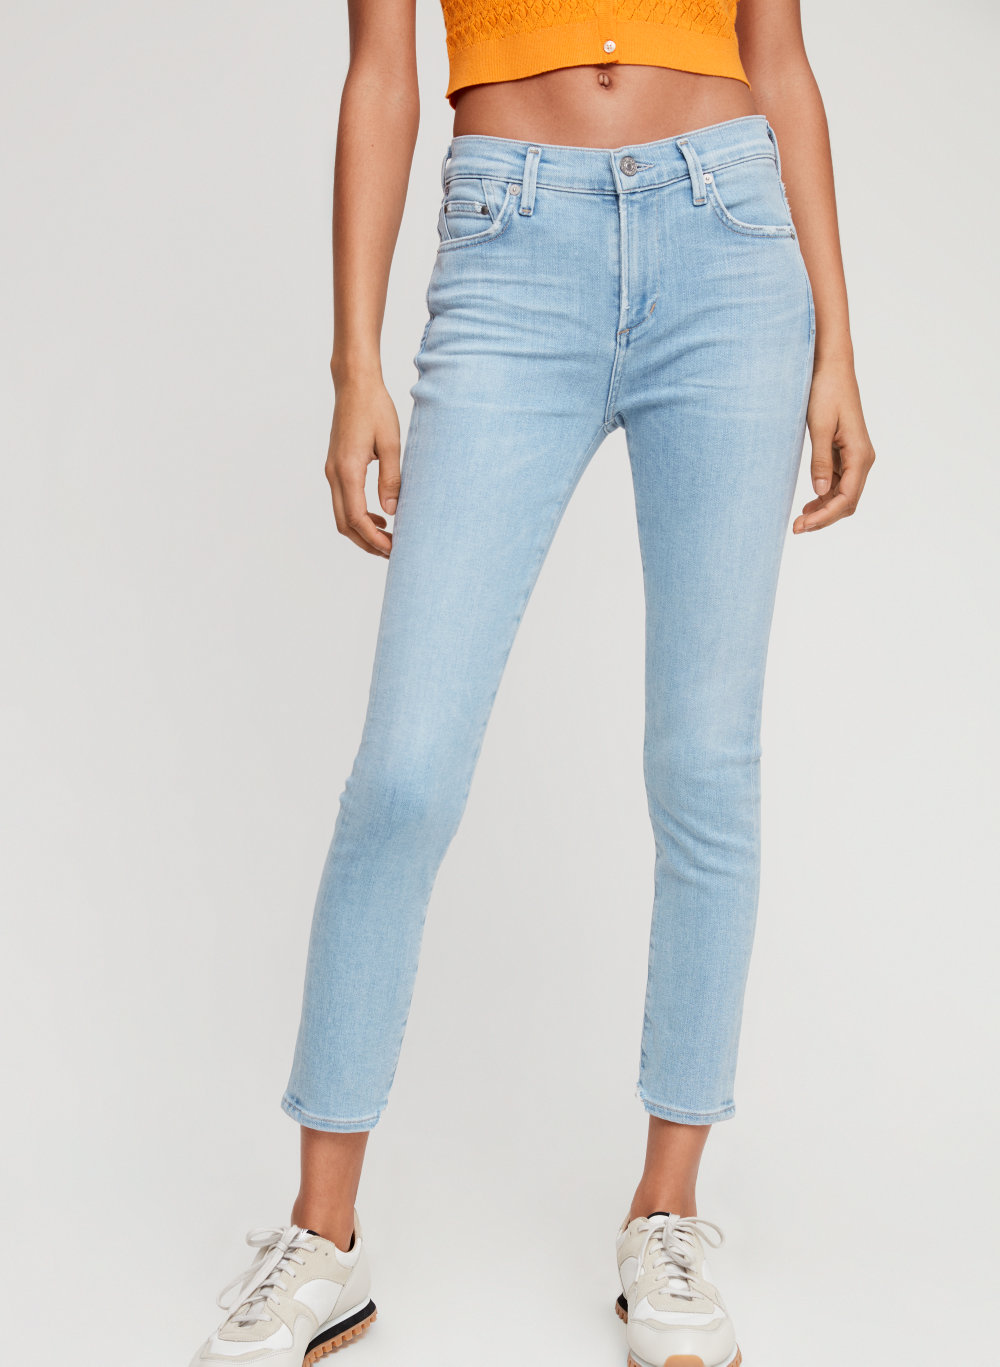 citizens of humanity jeans canada